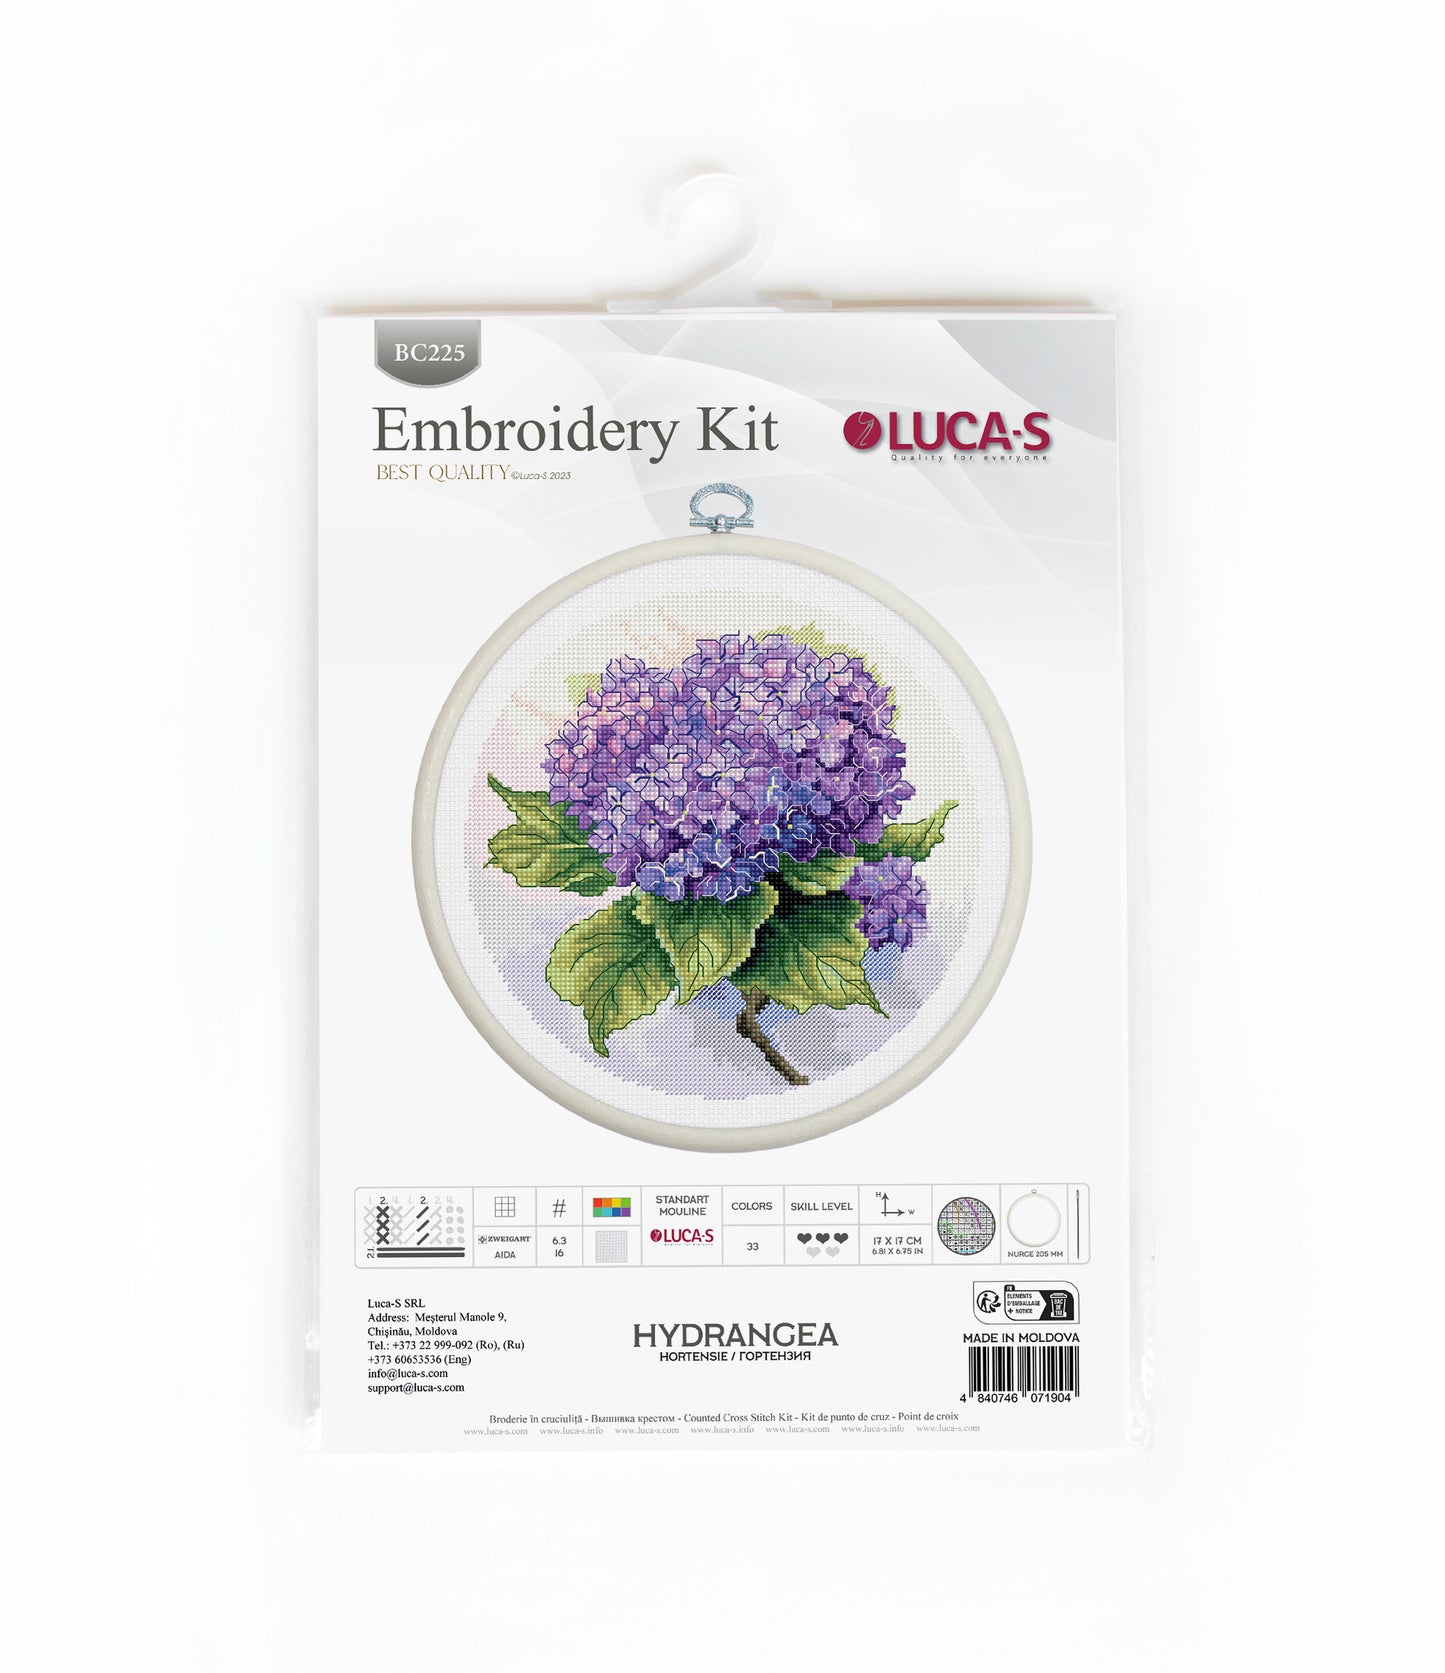 Cross Stitch Kit with Hoop Included Luca-S - Hydrangea, BC225